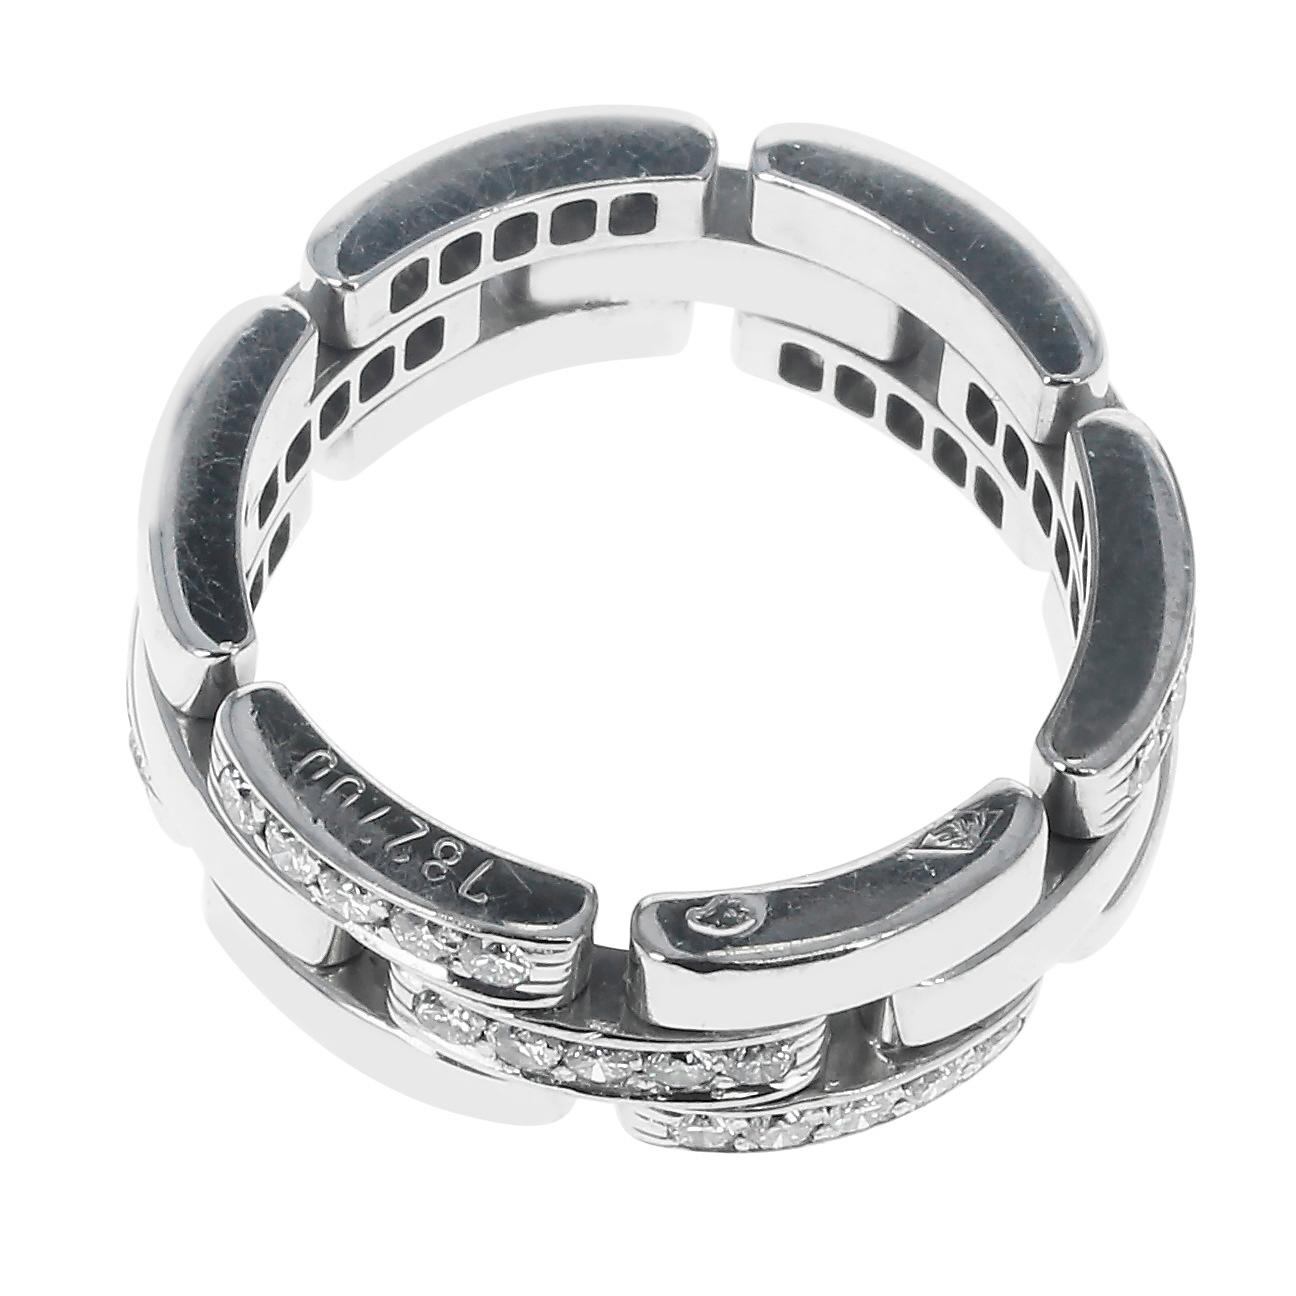 A Cartier Panthere Link White Diamond Wedding Band made in 18K White Gold. Total Weight: 12.49 grams. Ring Size US 7. Paperwork Available: Cartier Receipt. 
